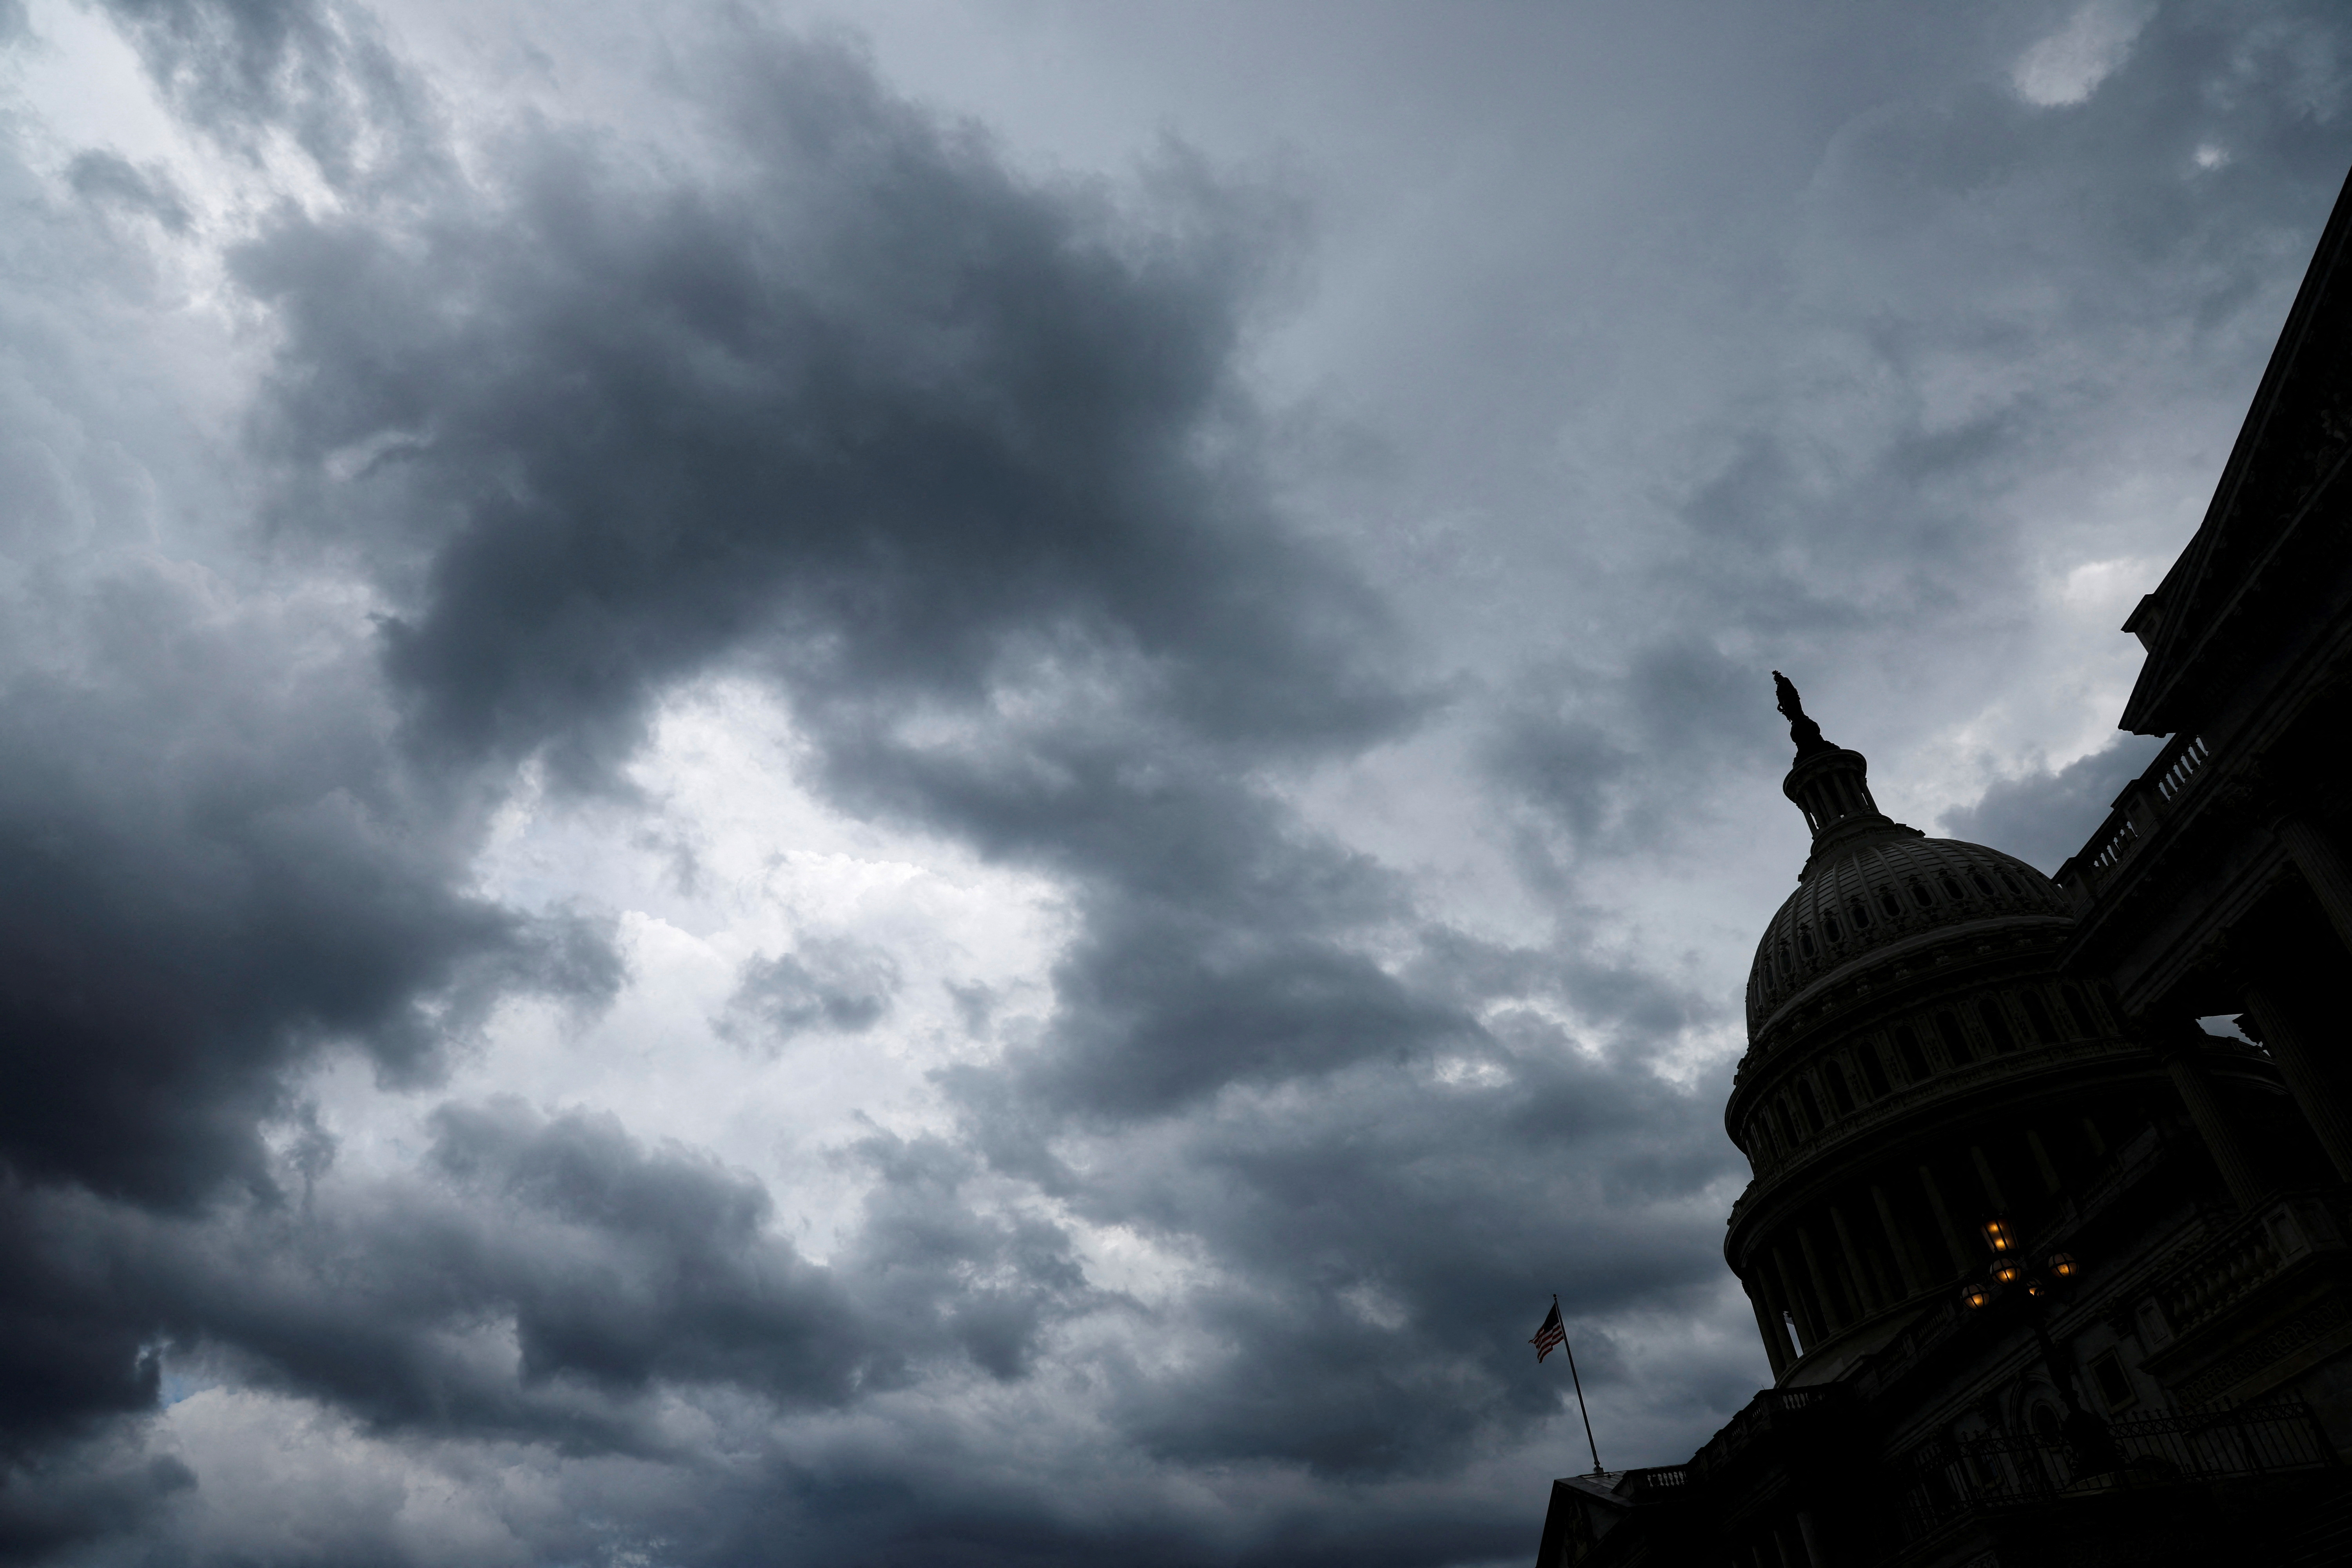 Storm clouds pass over the U.S. Capitol in Washington